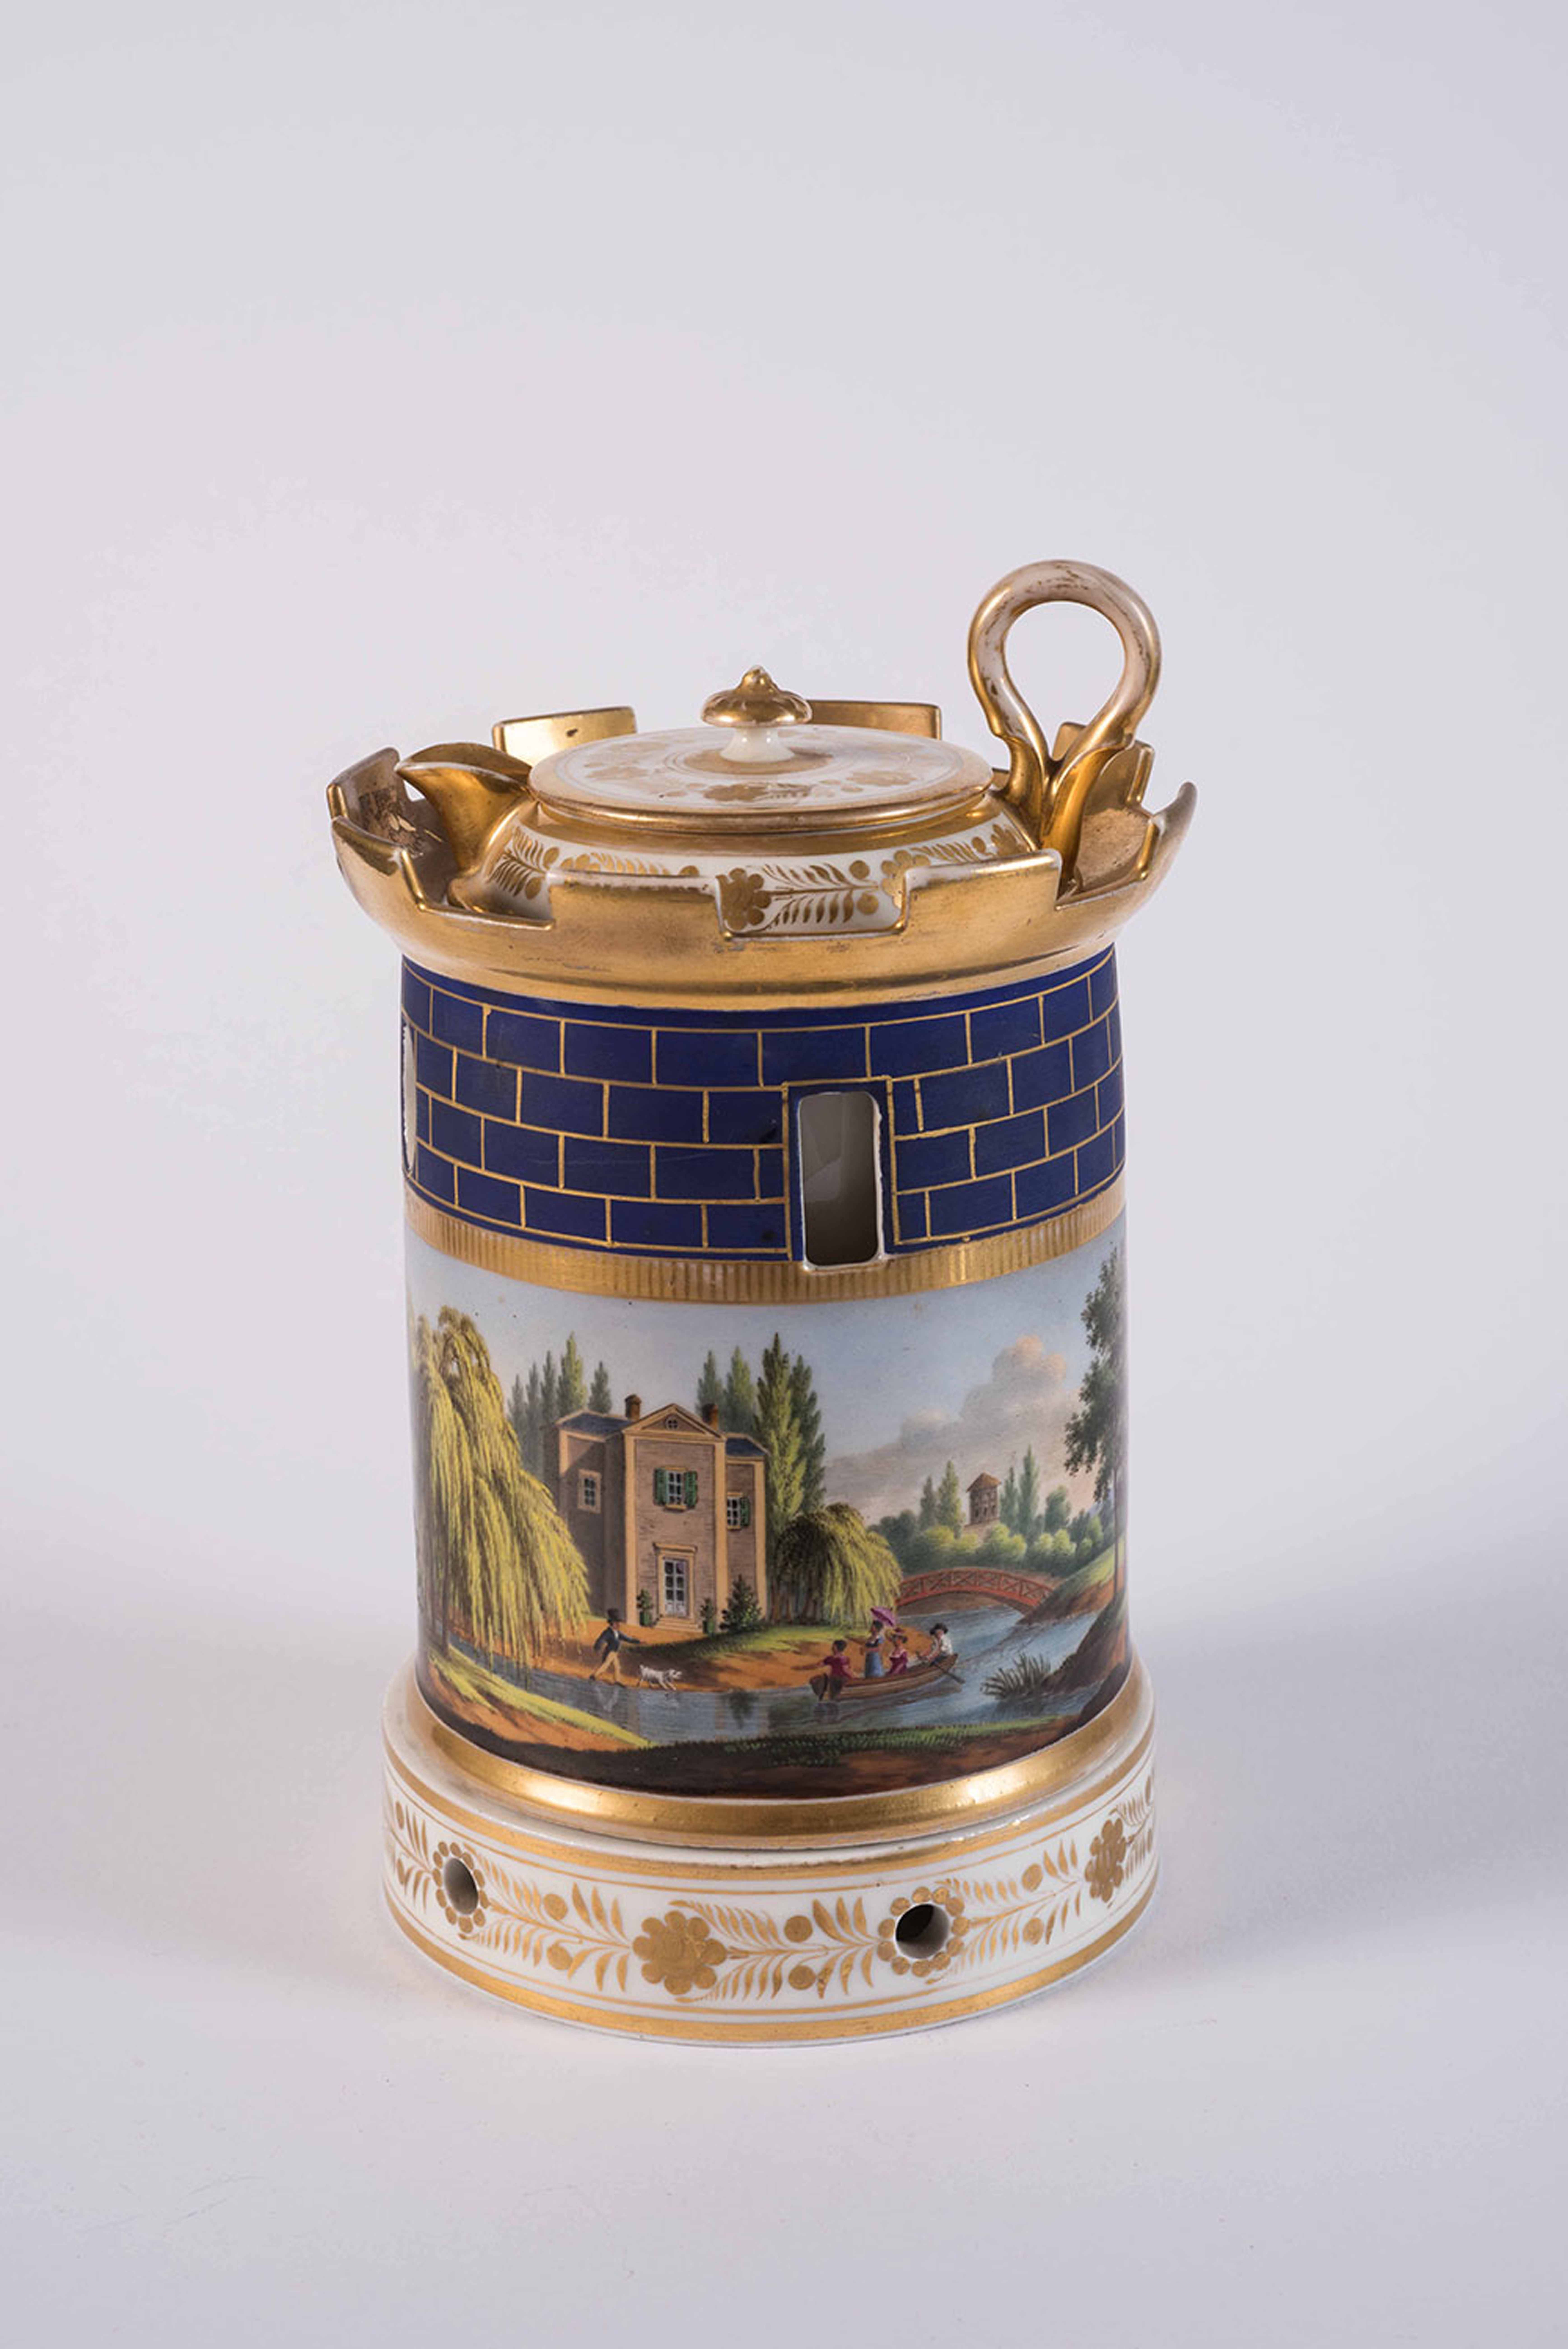 A French Early 19th Century Darte Freres Veilleuse Tea Warmer with Lidded Cup